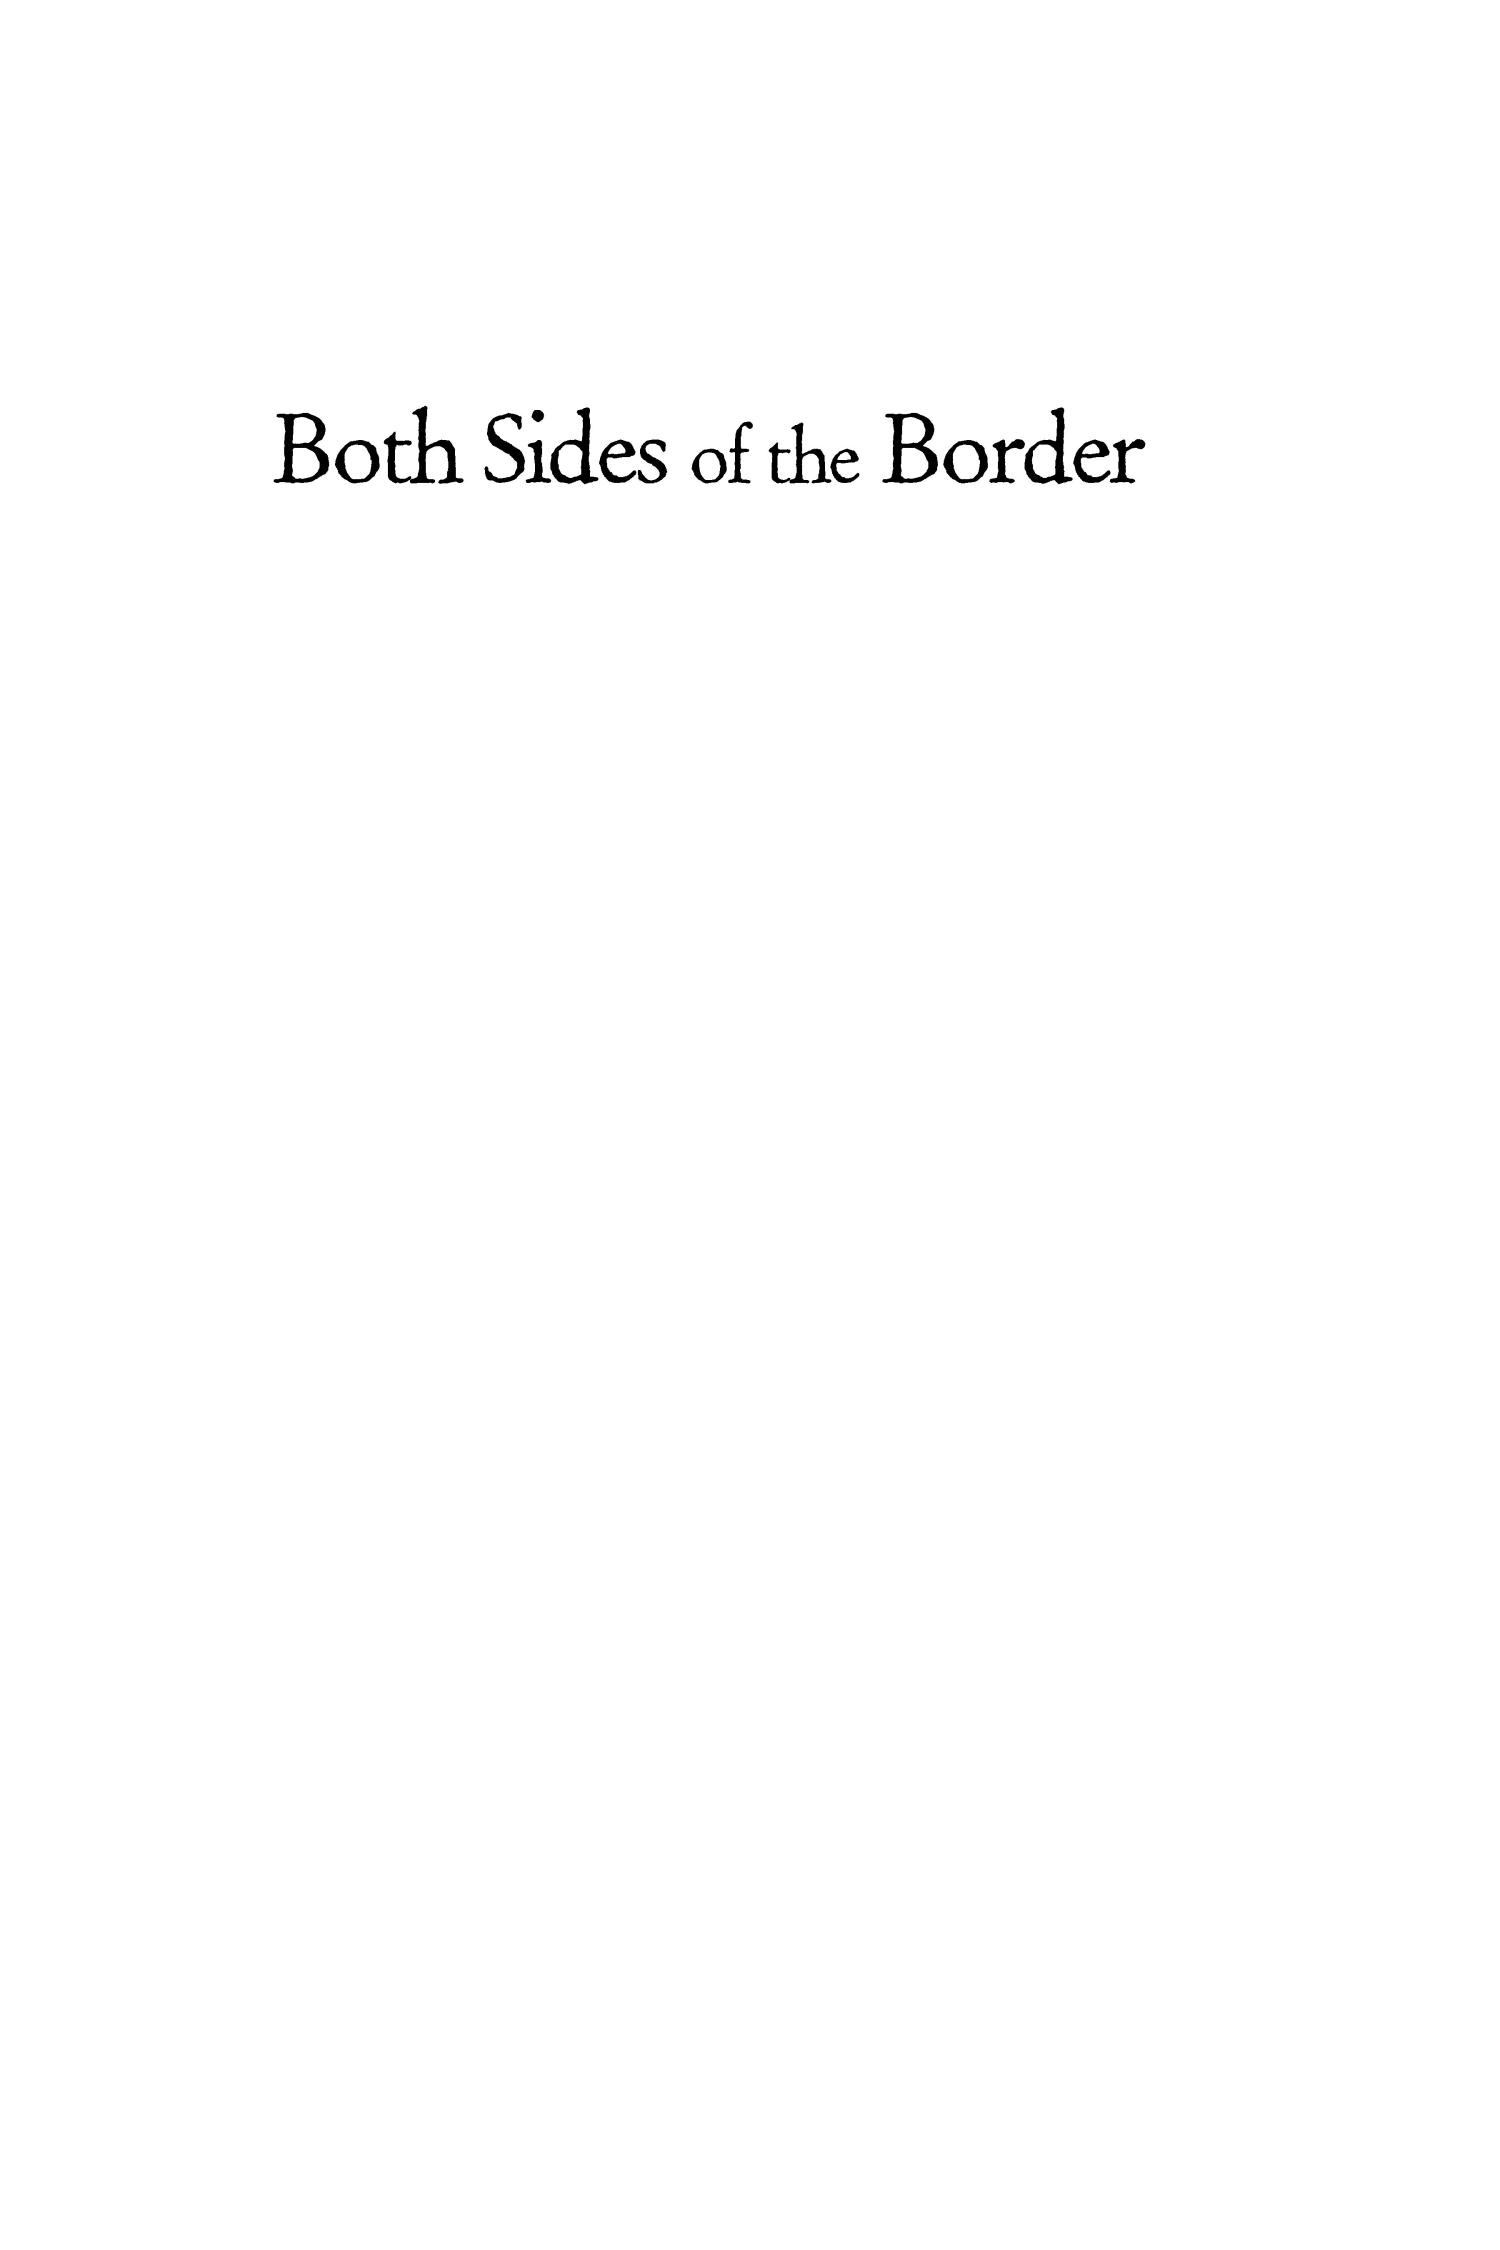 Both Sides of the Border: A Scattering of Texas Folklore
                                                
                                                    I
                                                